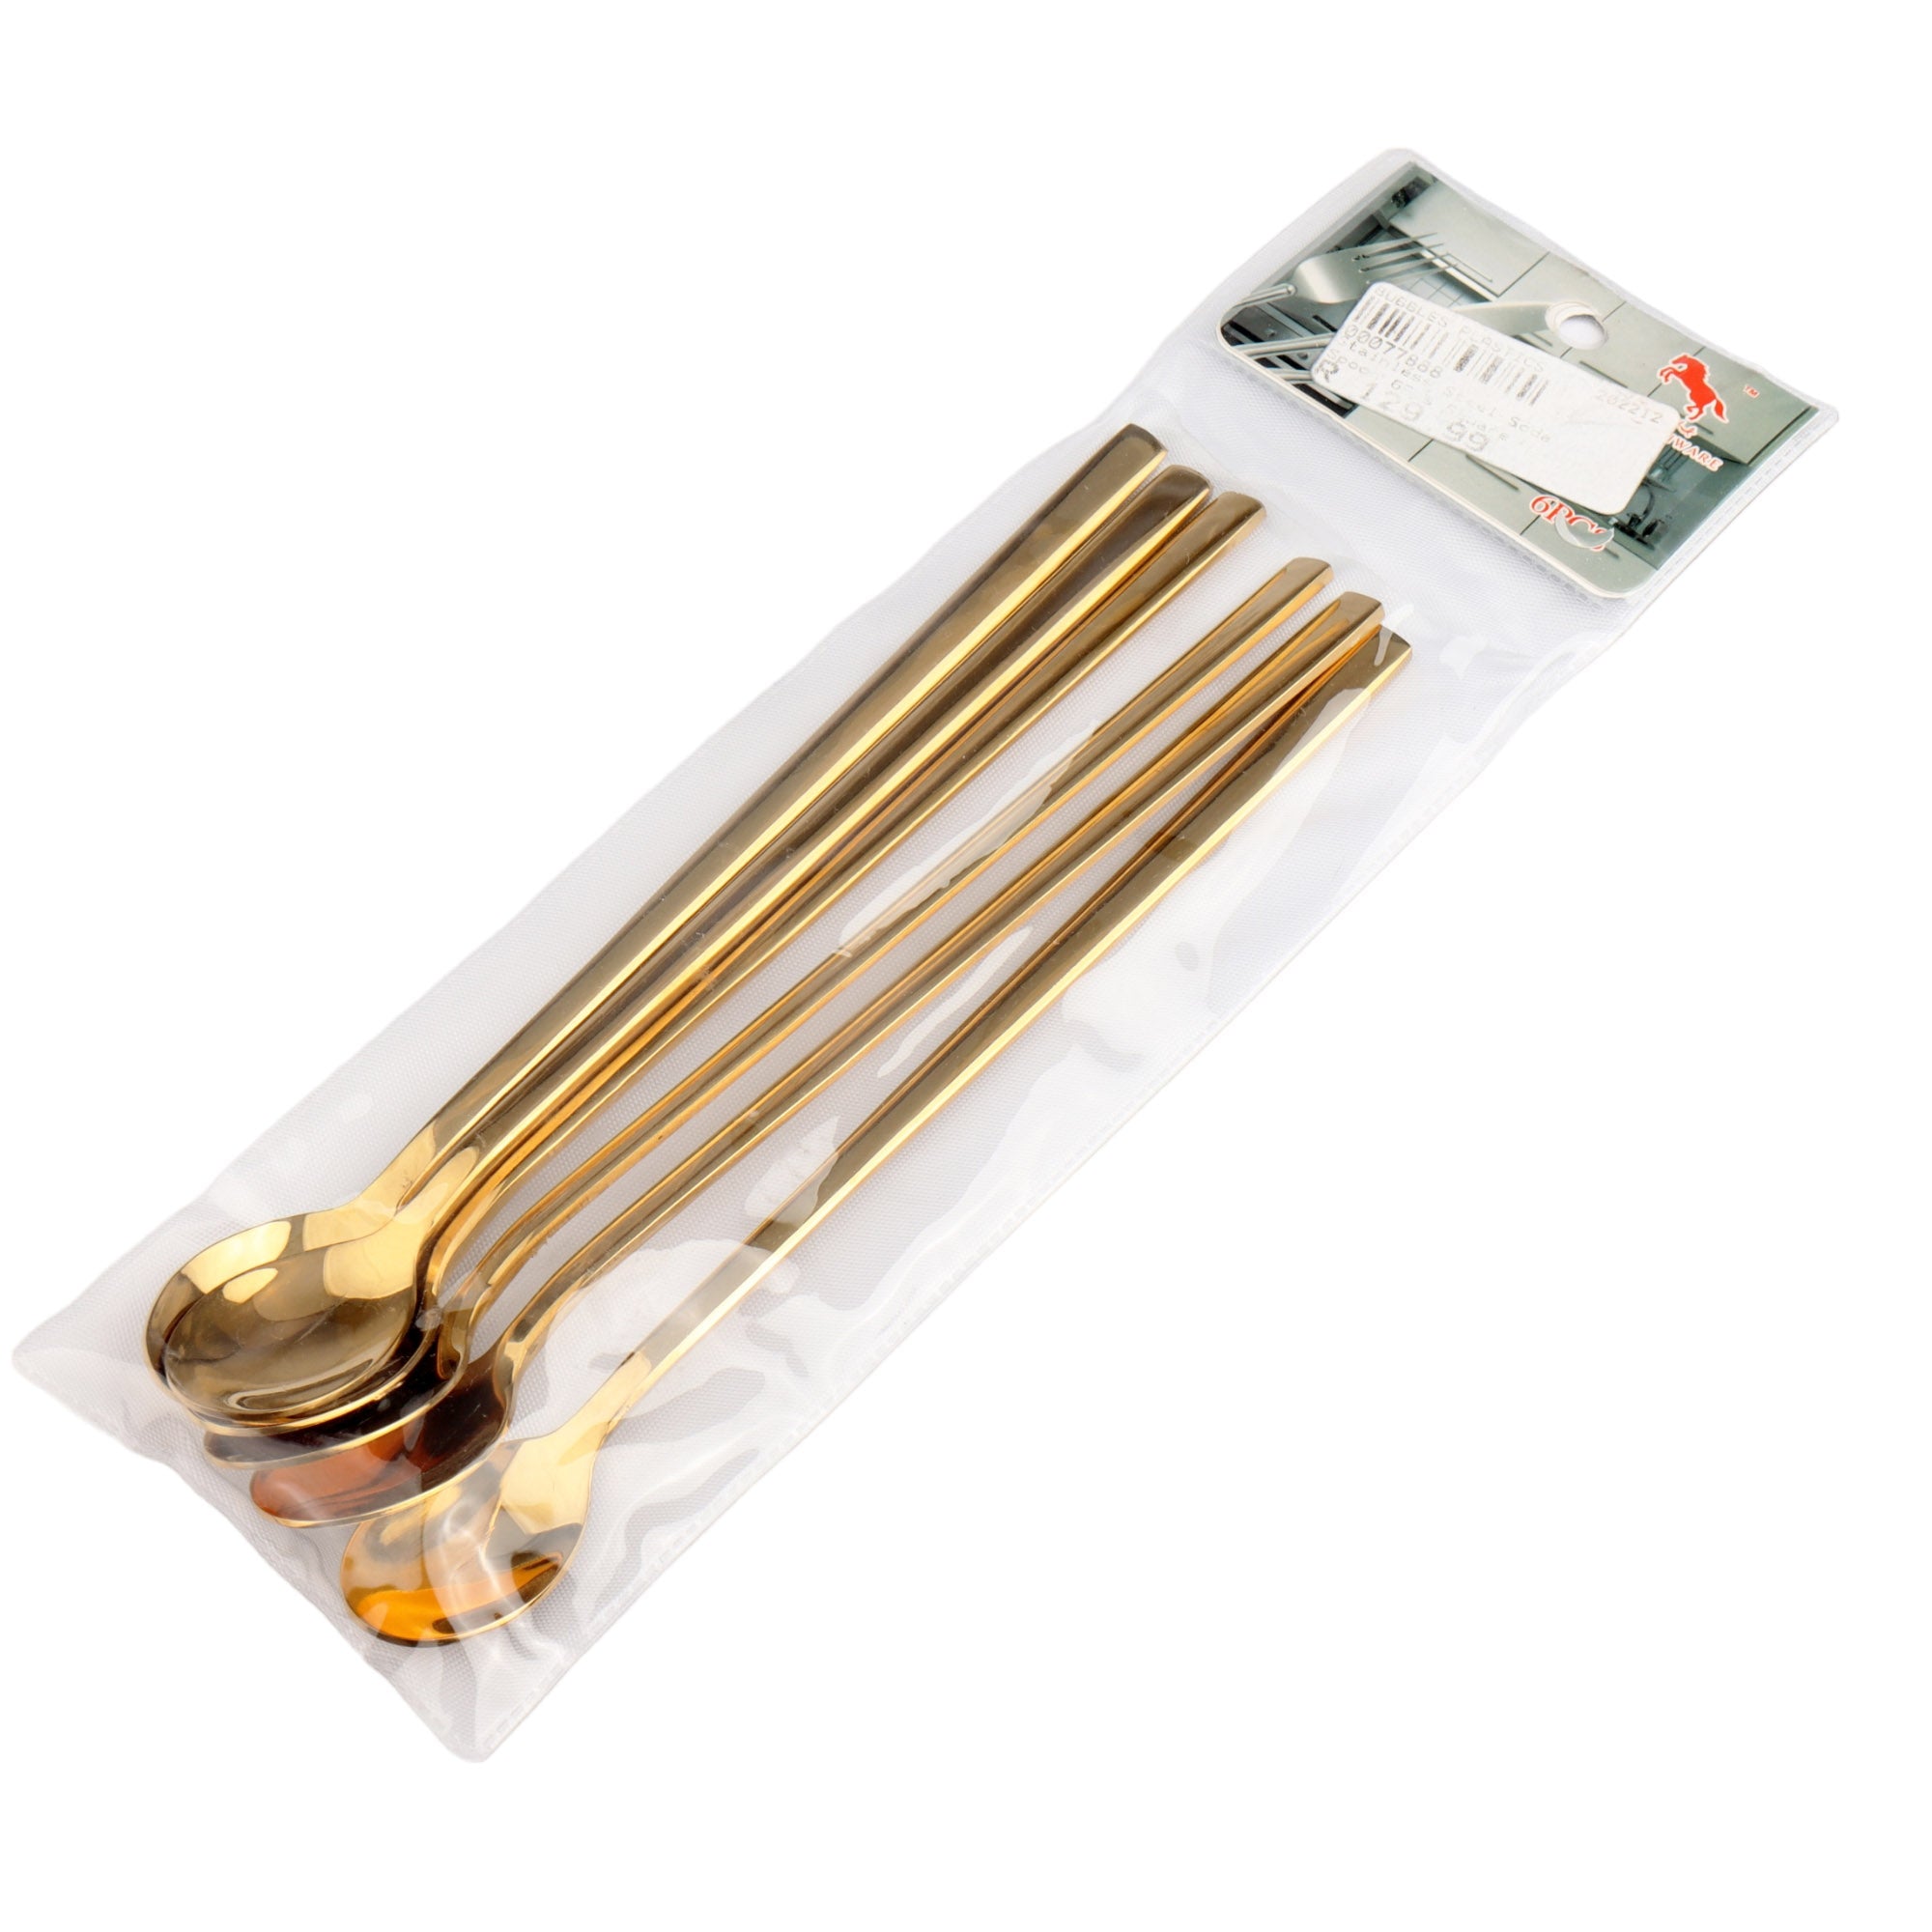 Stainless Steel Soda Spoon 6Pcs Square Gold Handle Colour